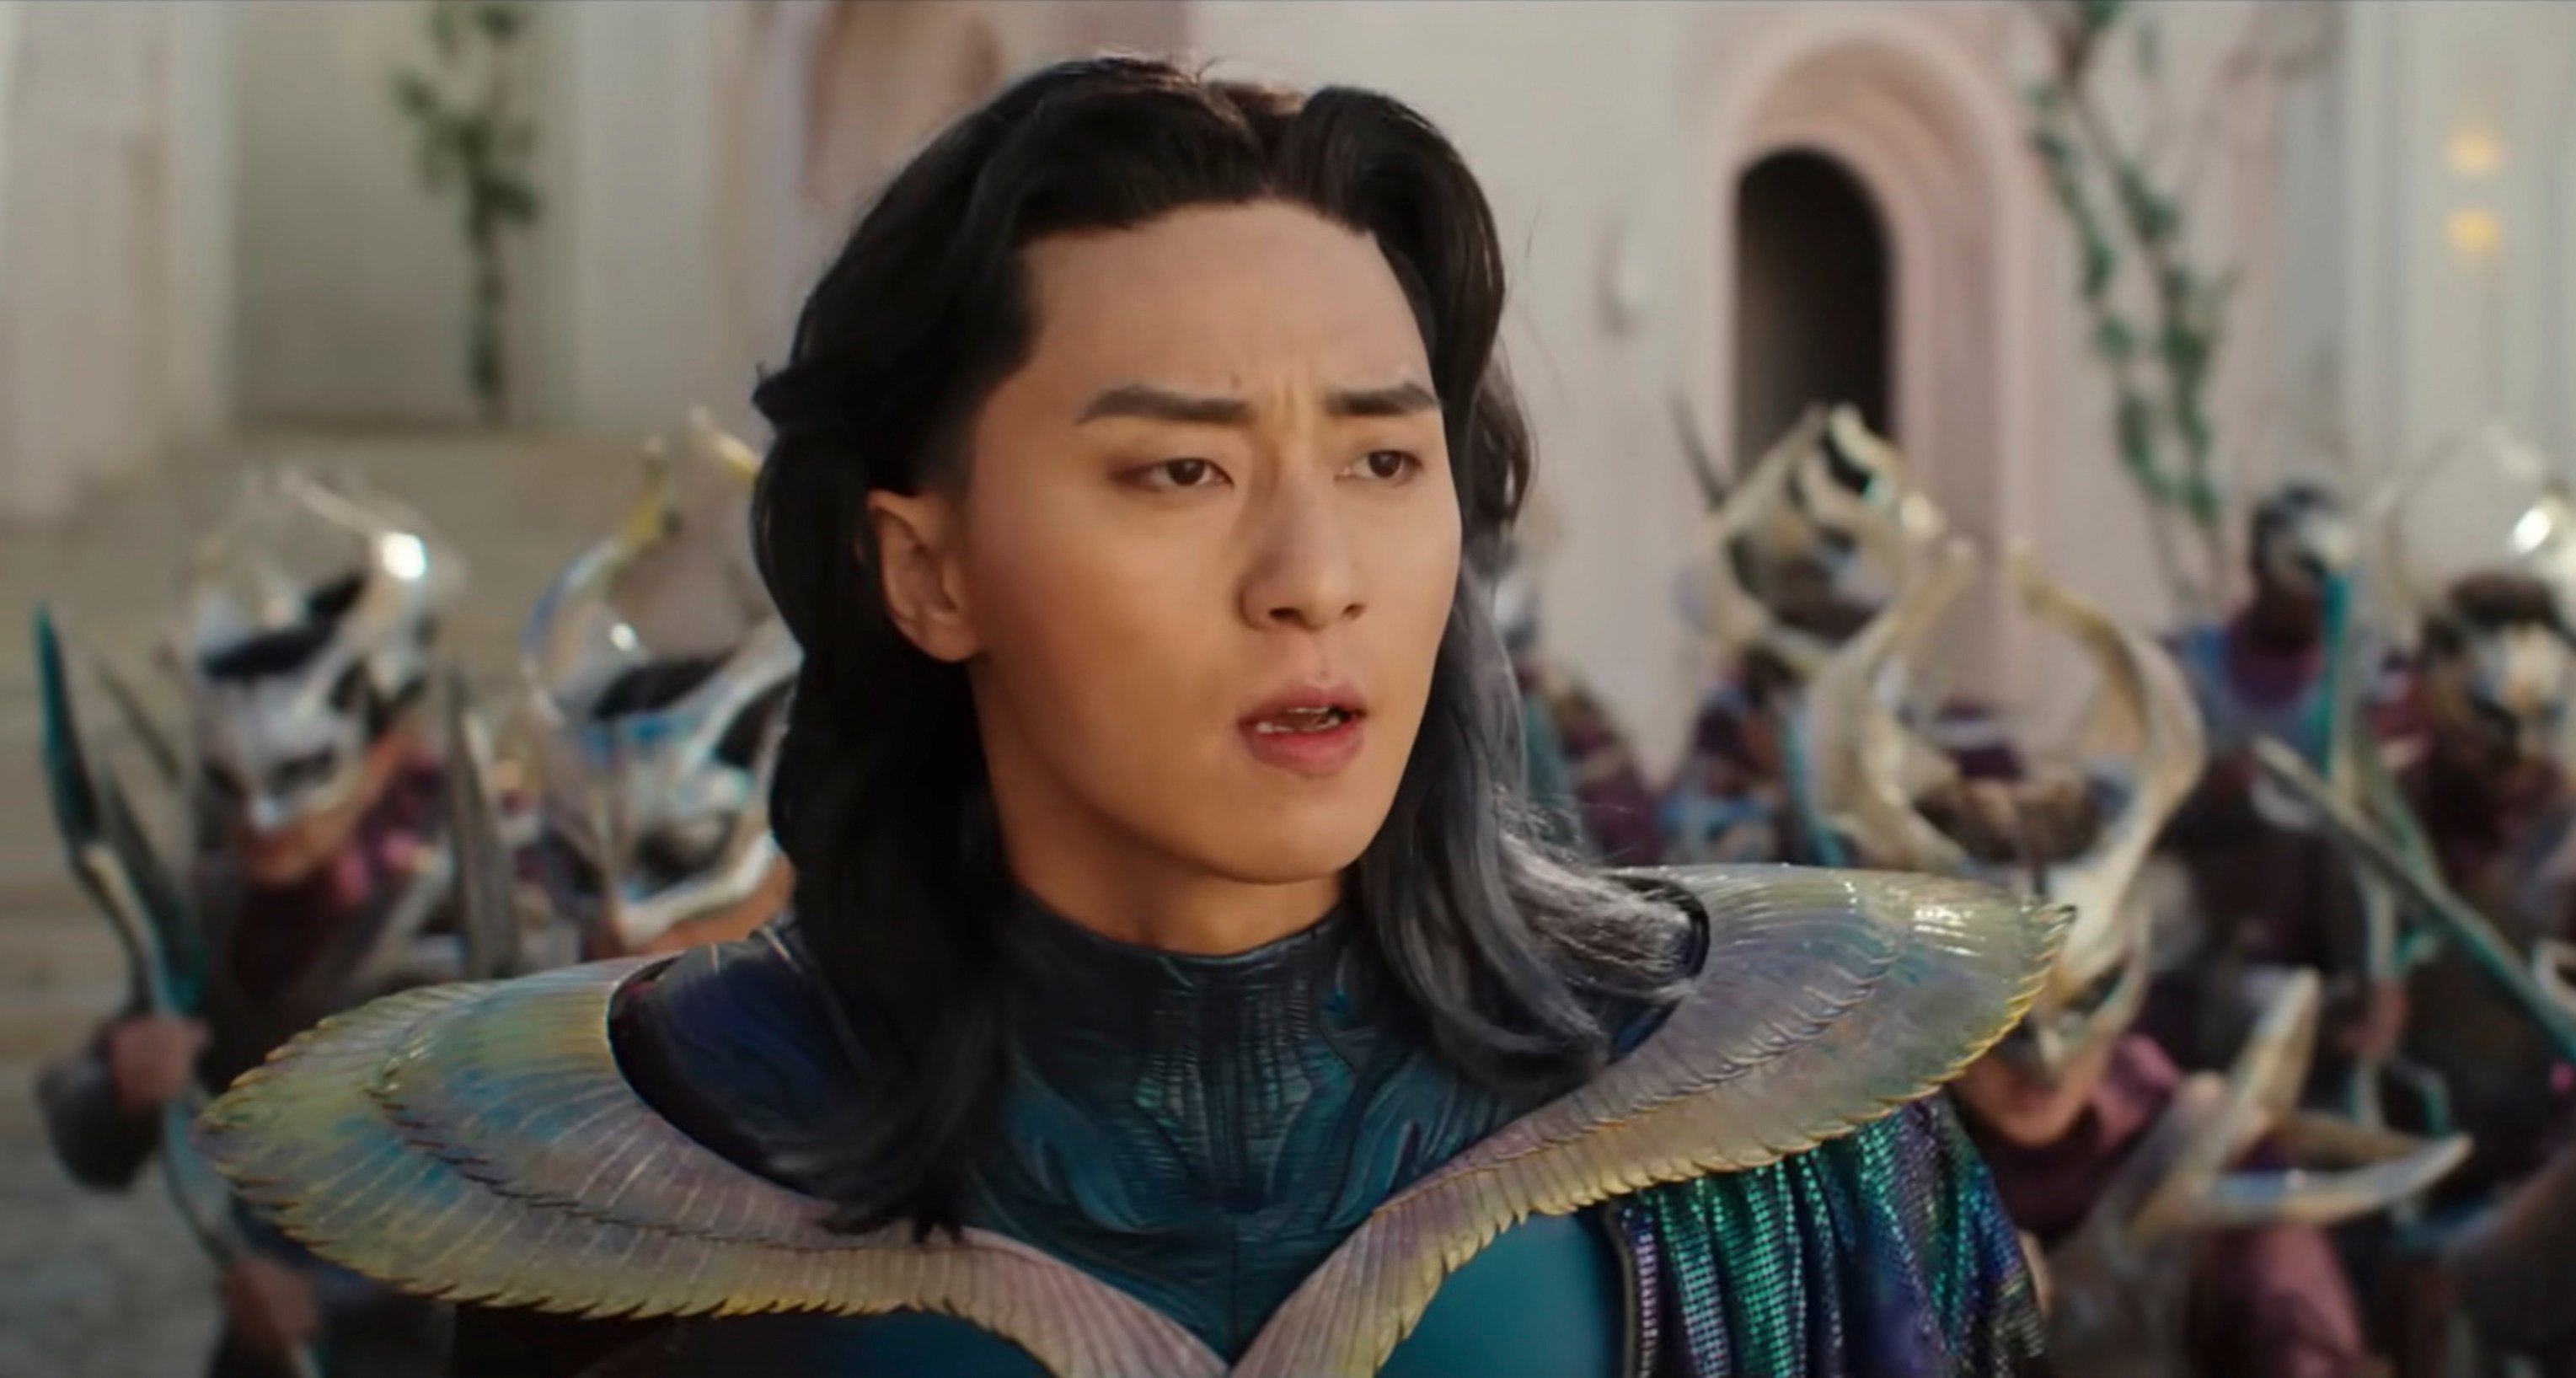 South Korean actor Park Seo-Joon in a still from “The Marvels”. Park is the latest in a long line of actors and actresses of Asian descent to appear in the Marvel Cinematic Universe. Photo: YouTube/@Marvel